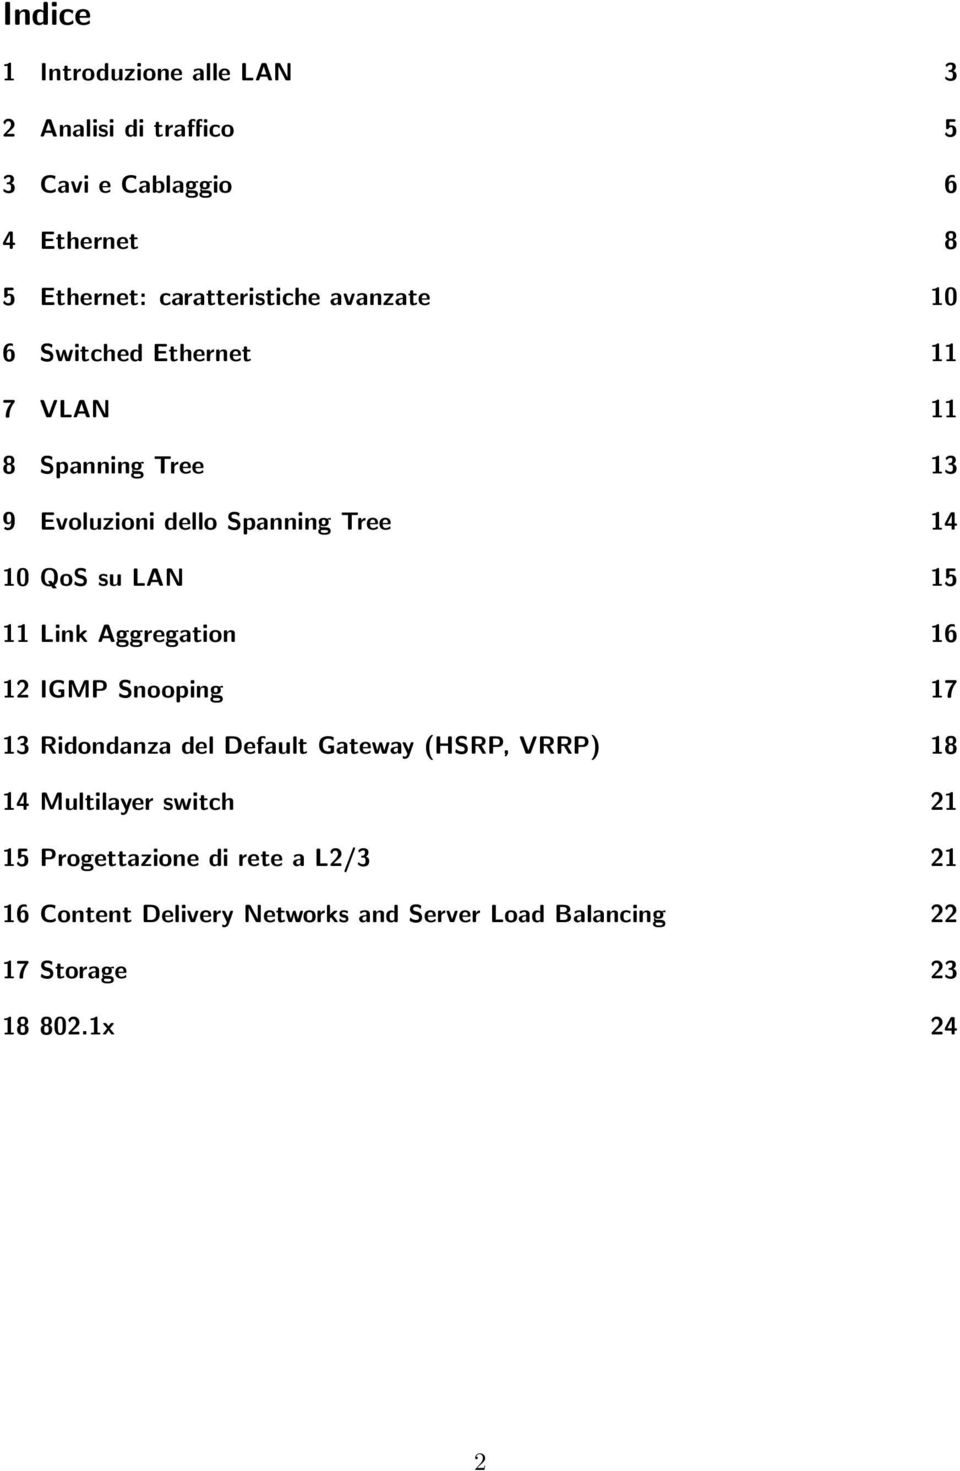 11 Link Aggregation 16 12 IGMP Snooping 17 13 Ridondanza del Default Gateway (HSRP, VRRP) 18 14 Multilayer switch 21